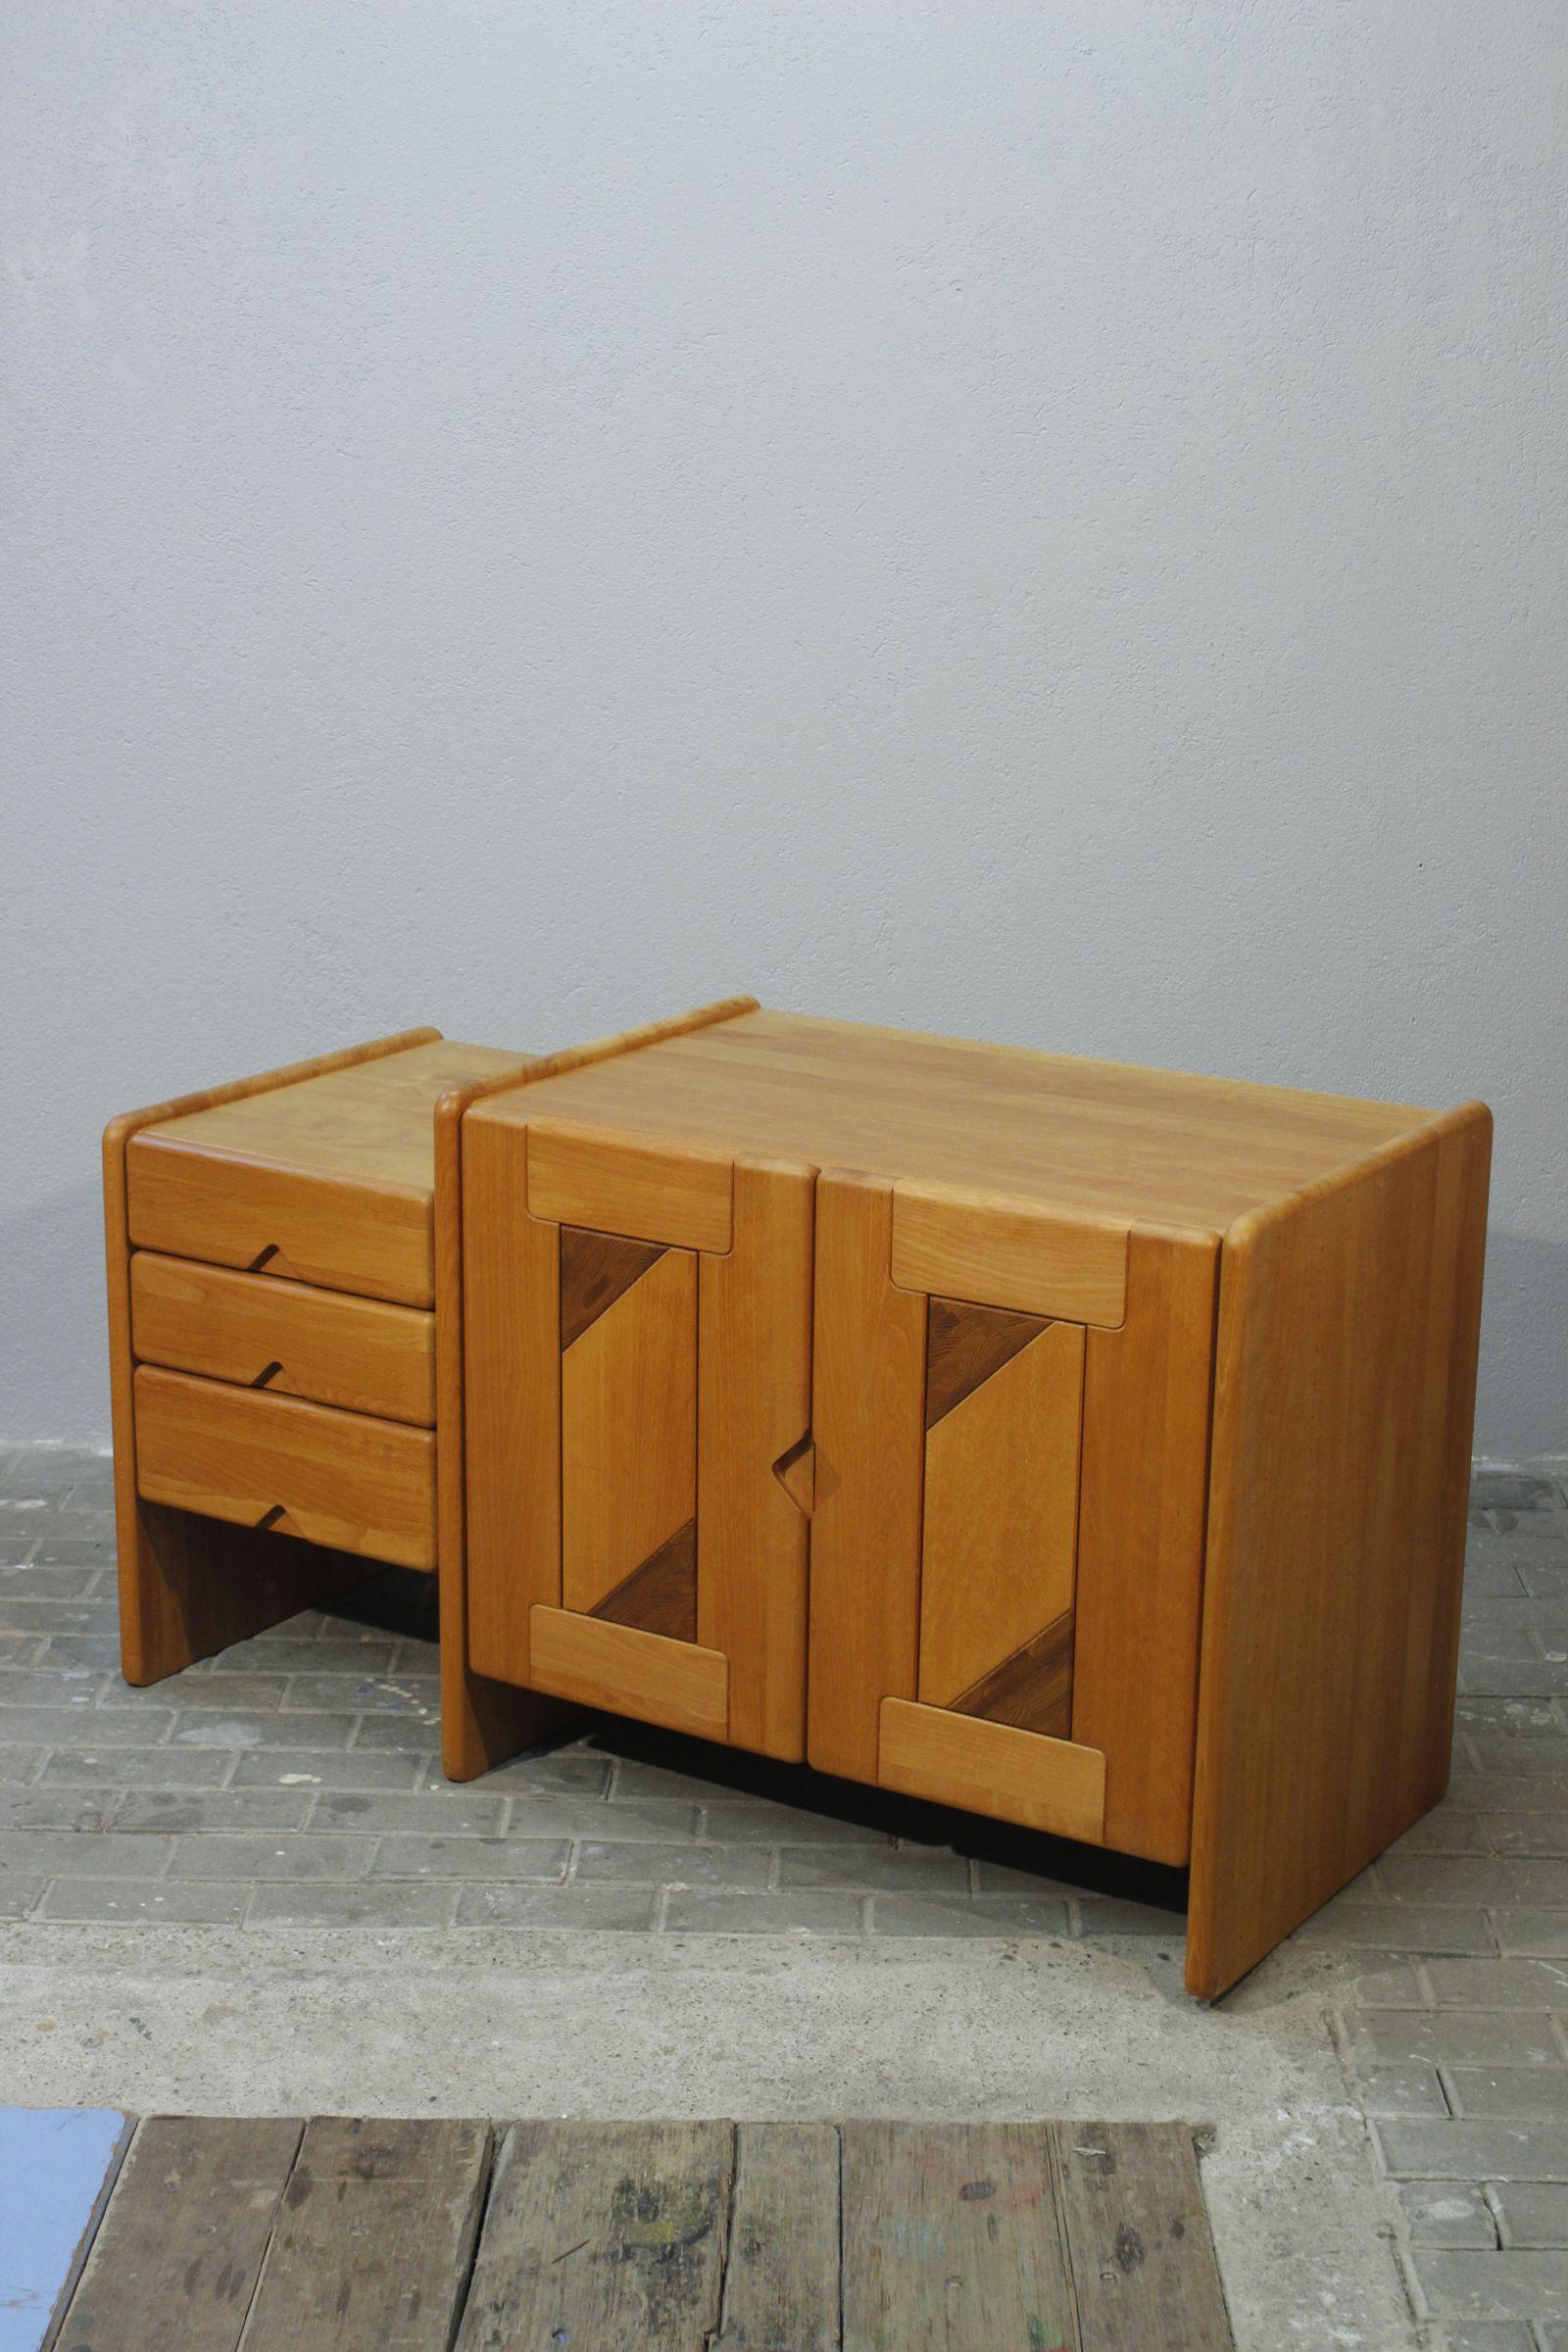 Two-piece base unit from the Fagus series, designed by Søren Nissen & Ebbe Gehl for the Seltz cabinetmaker in the early 90s, entirely in solid elm.

Fagus furniture is modular, so you can add as many elements as you like. 

All in very good